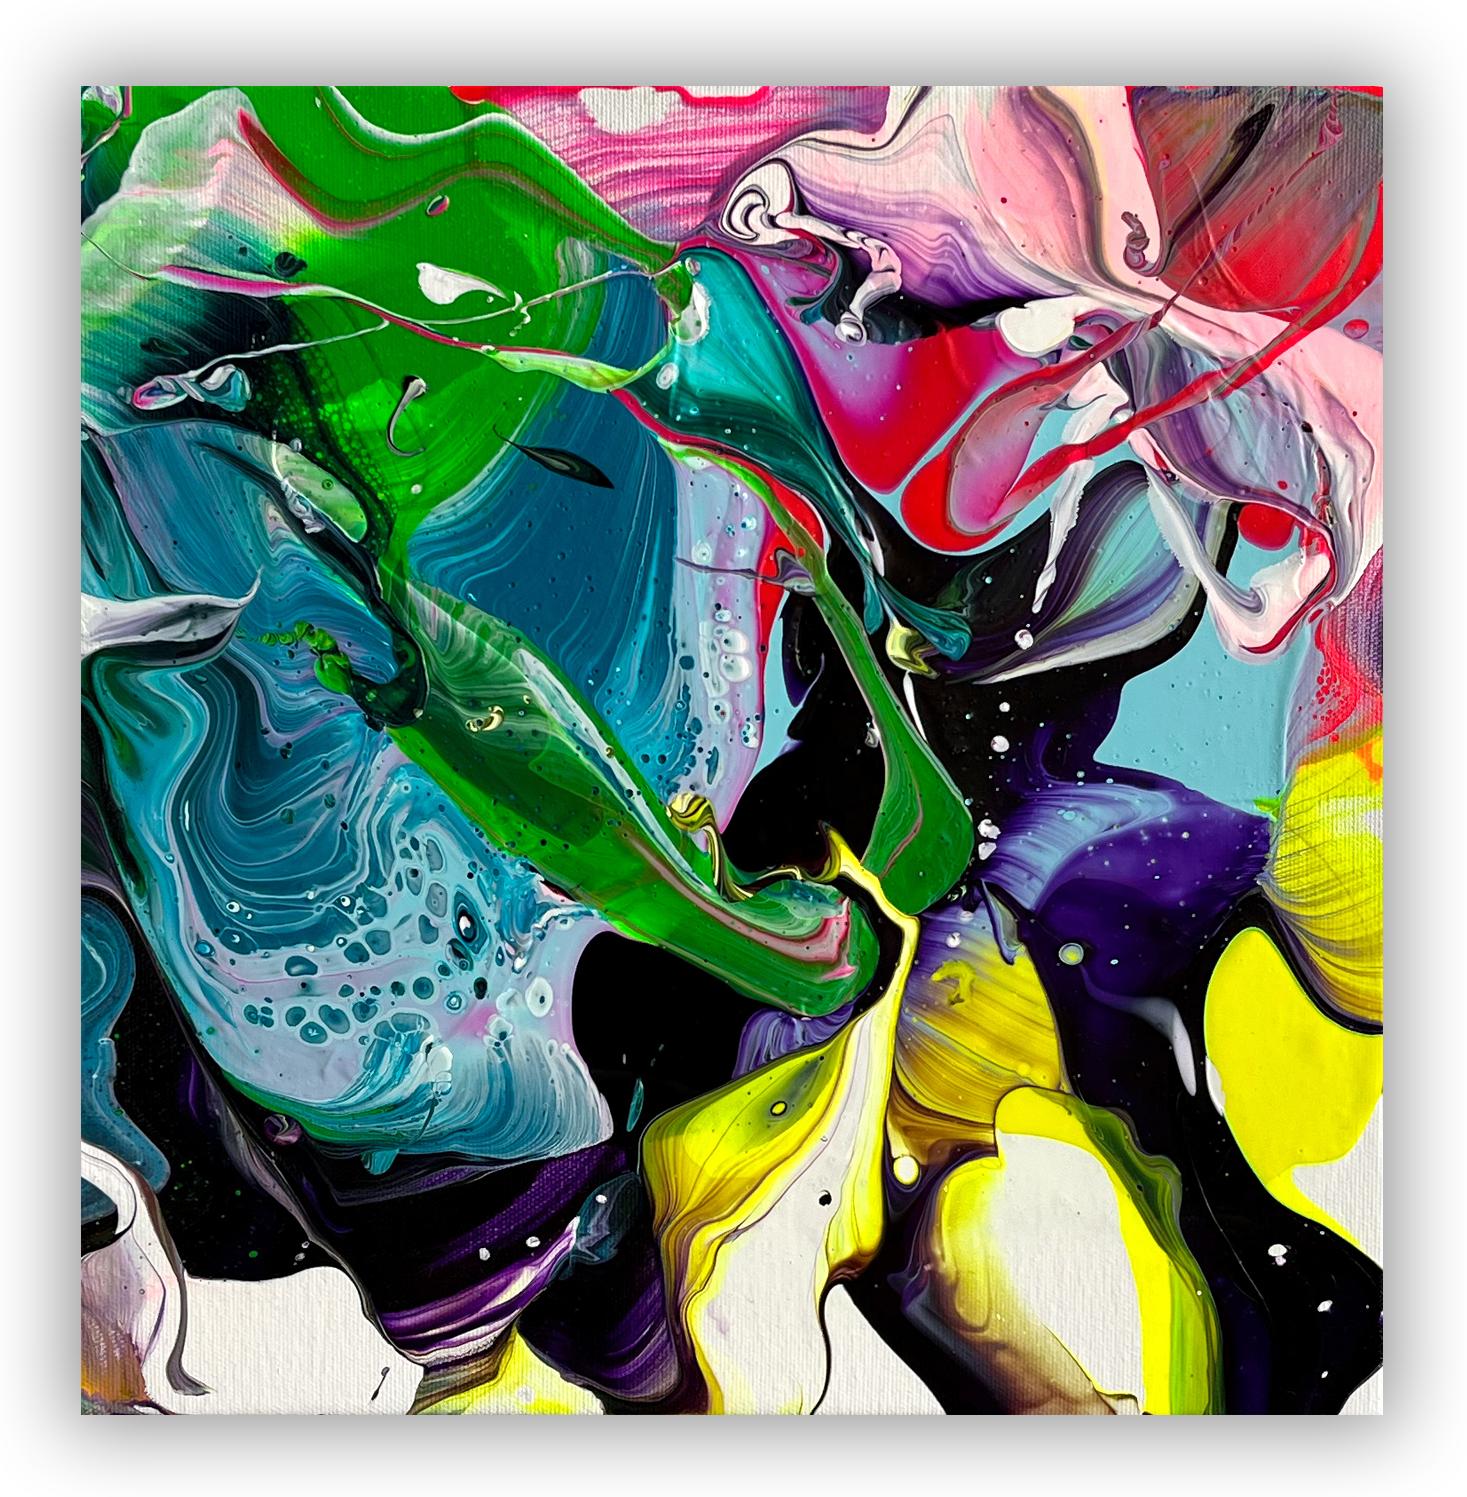 This work is exclusive to IdeelArt.

Barcelona based painter Nikolaos Schizas creates dynamic abstract paintings that radiate with vibrant splashes of color, and communicate a strong sense of movement and fluidity. He is inspired by a drive to